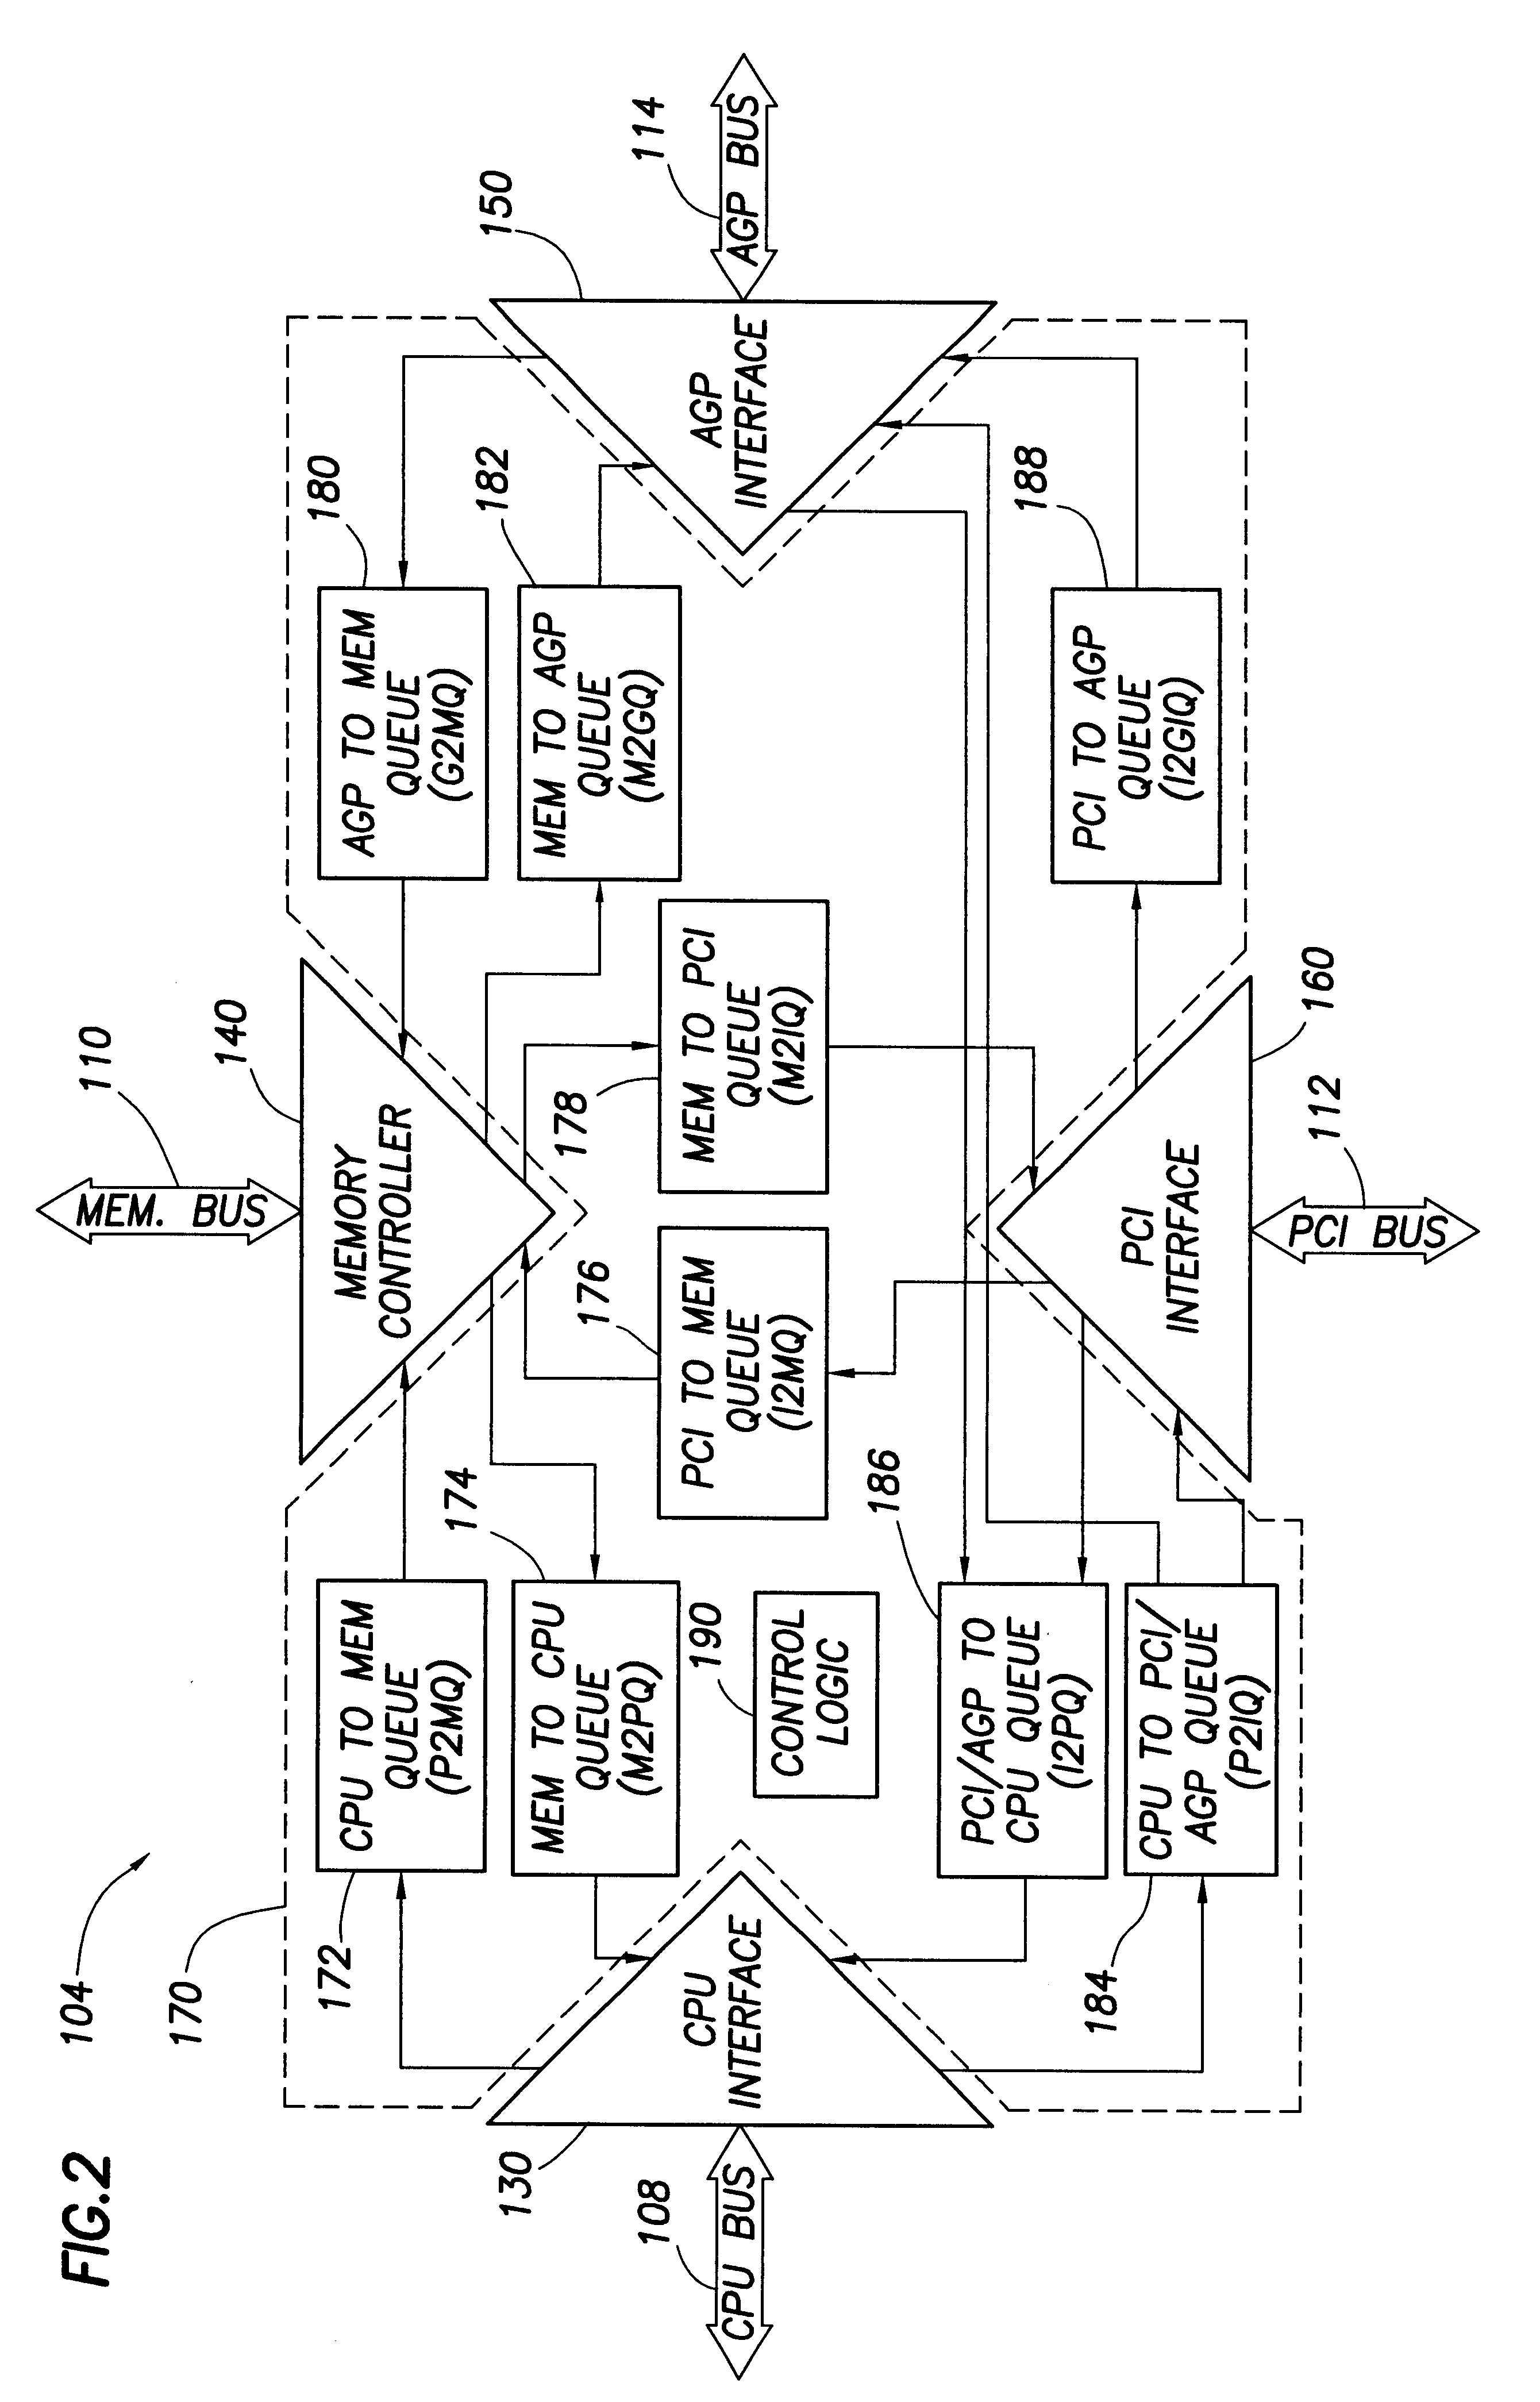 Computer system with improved memory access